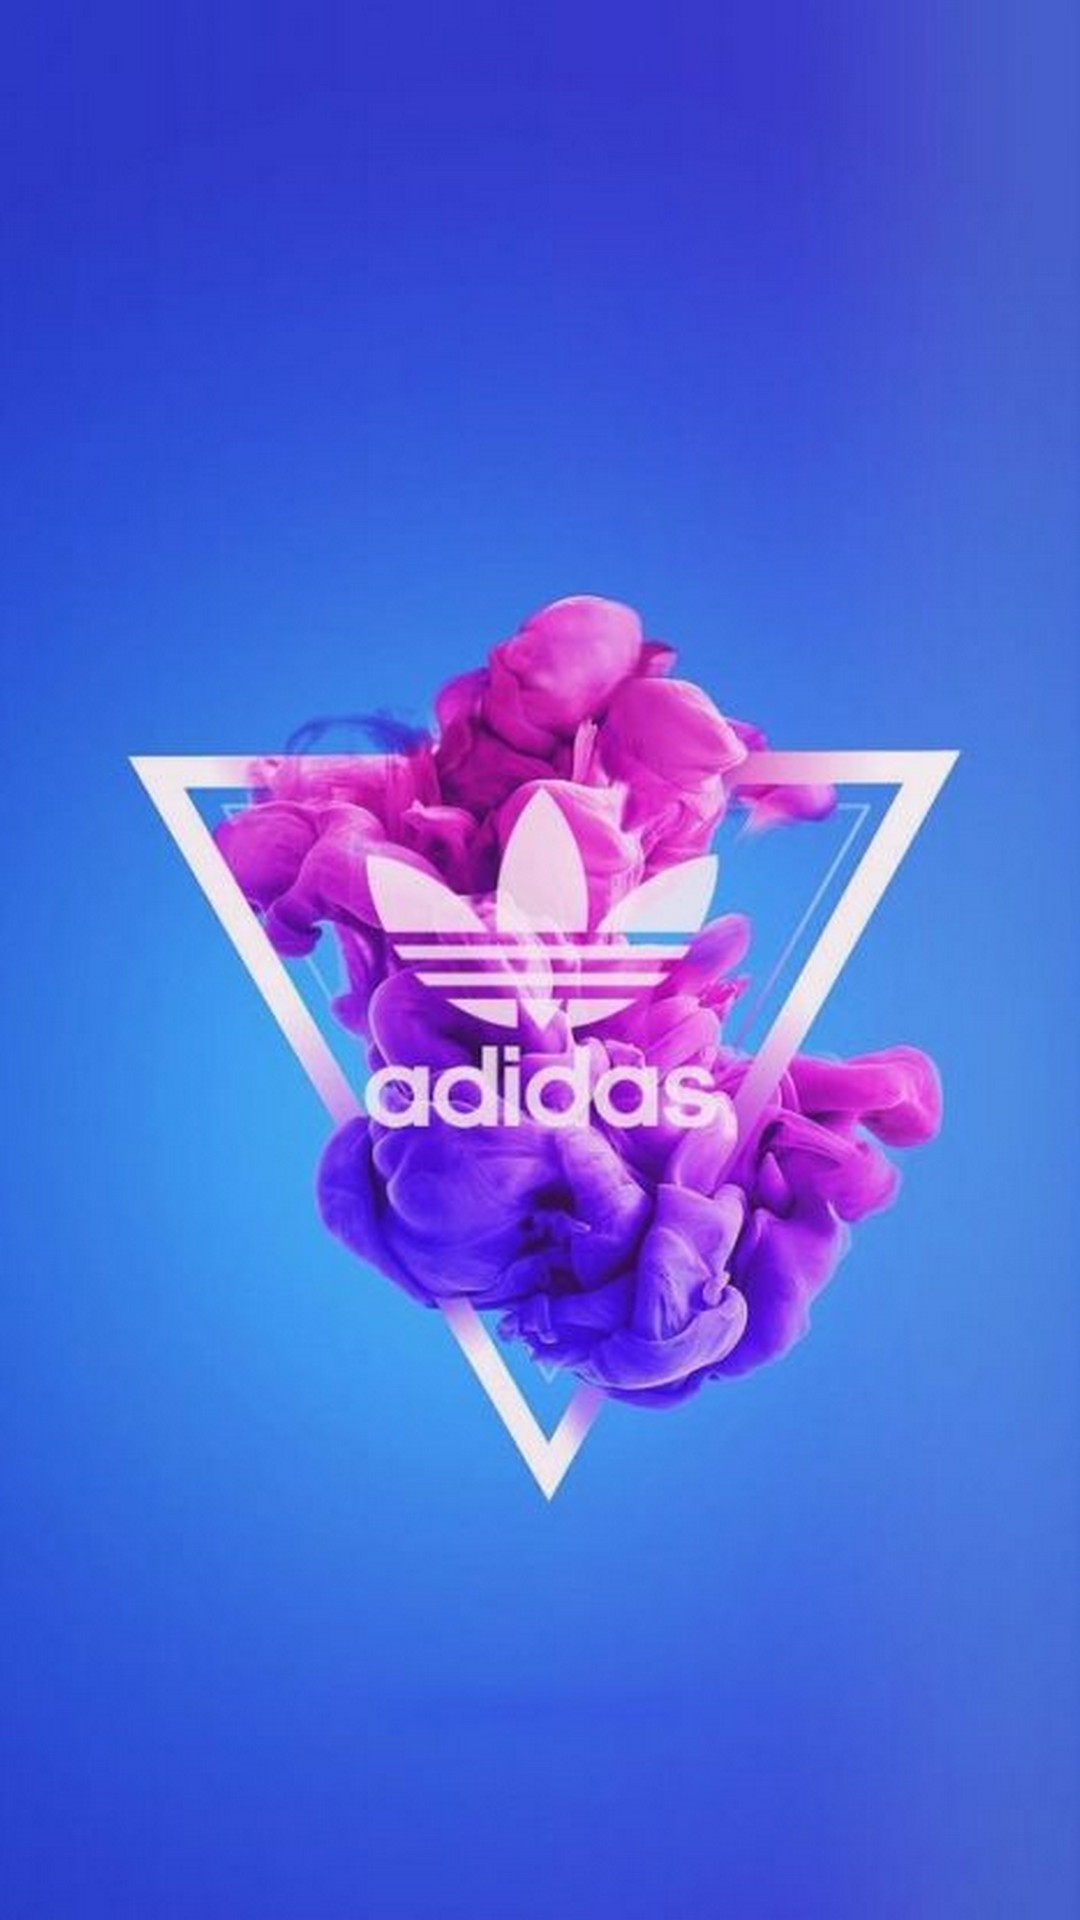 iPhone Wallpaper Adidas With high-resolution 1080X1920 pixel. You can use this wallpaper for your Windows and Mac OS computers as well as your Android and iPhone smartphones